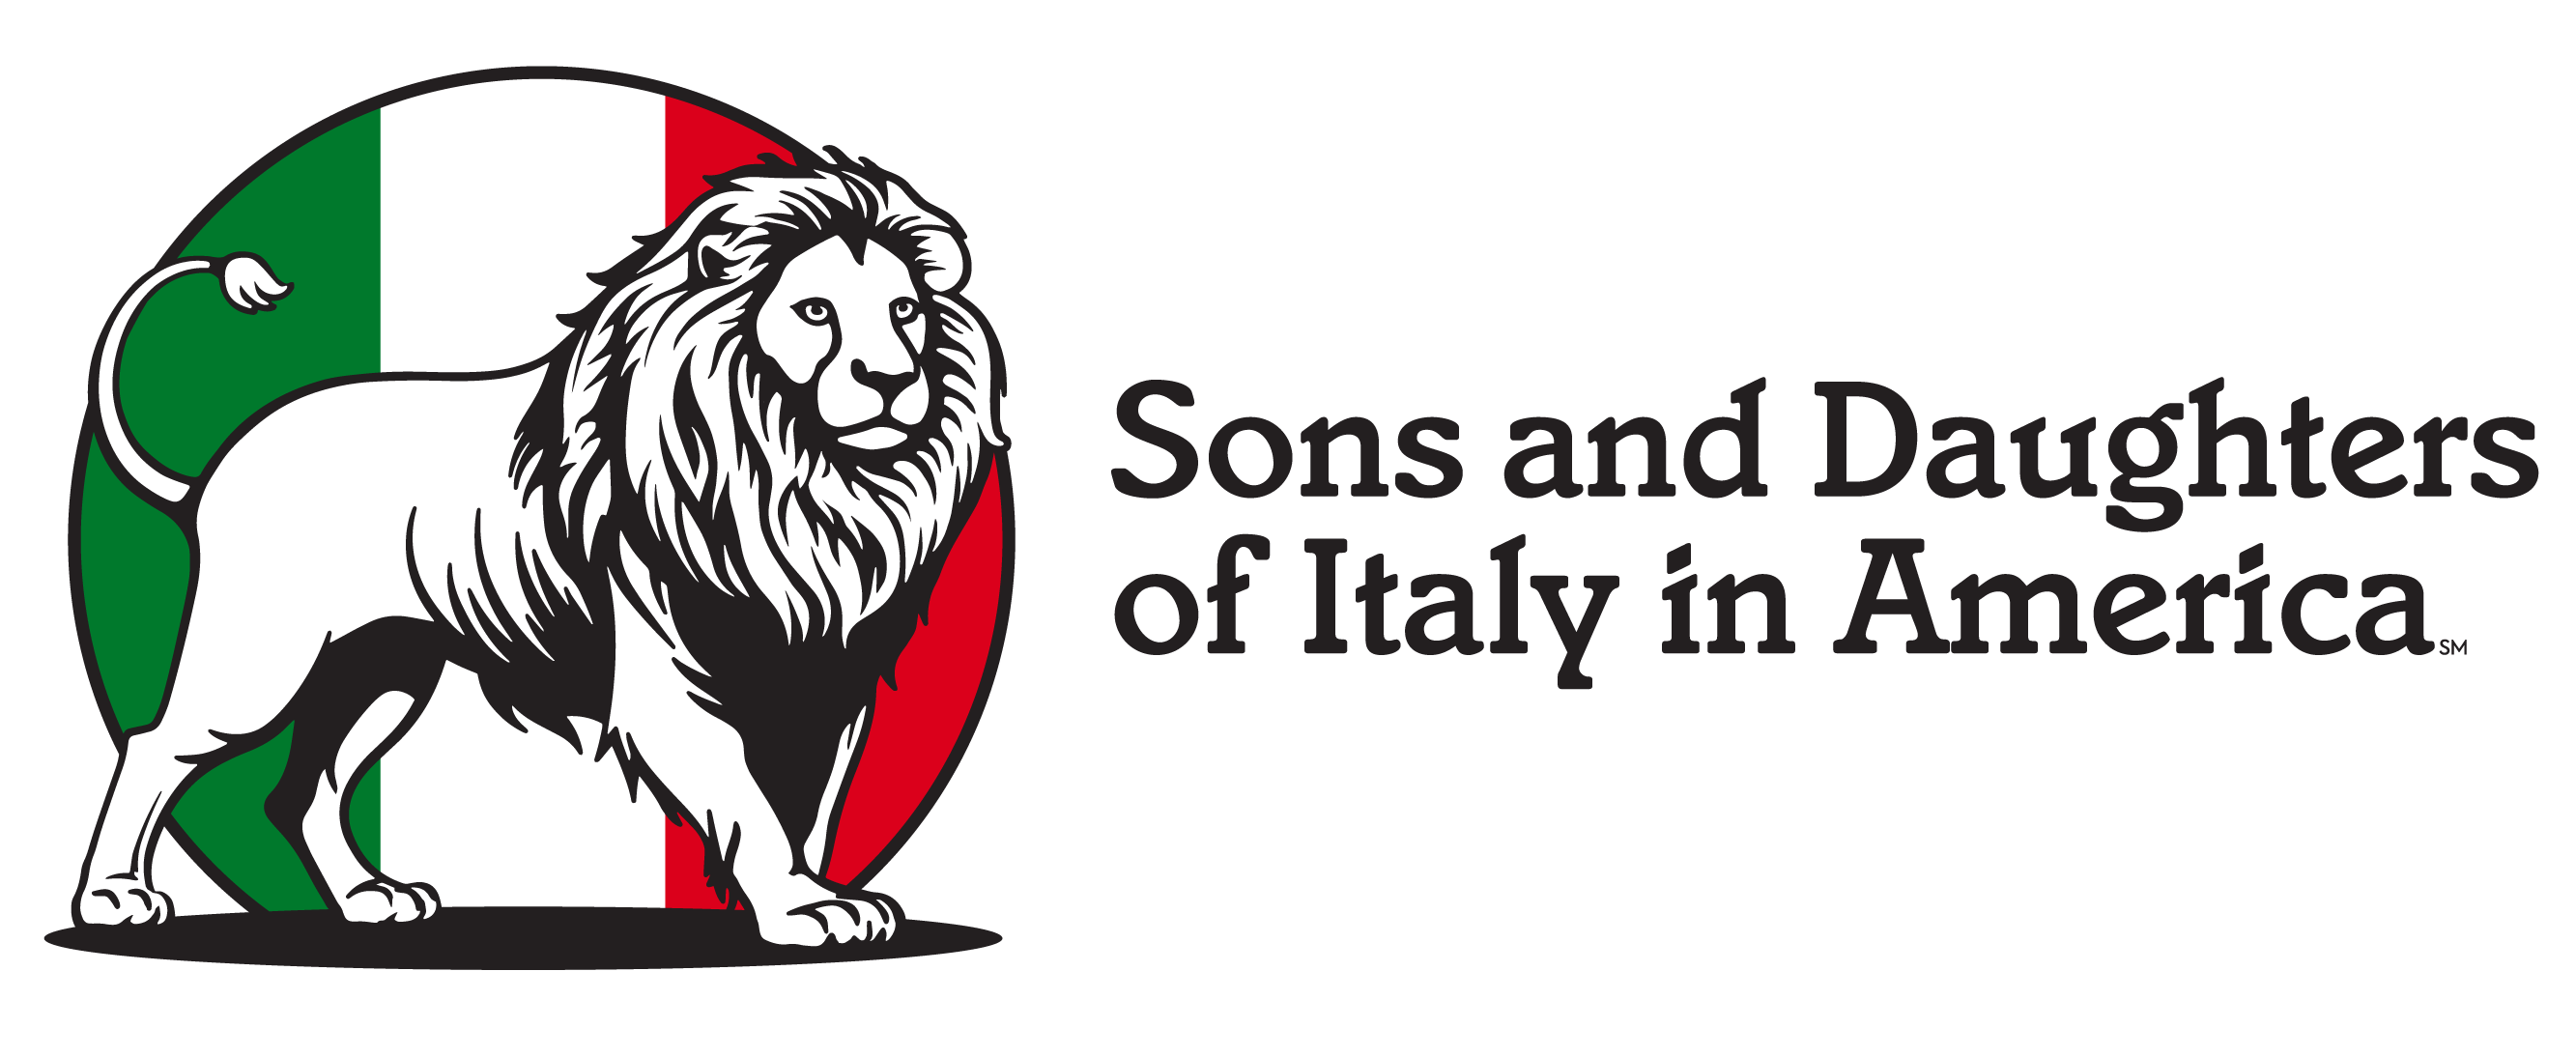 OSDIA Logo: A Lion over the colors of the Italian flag, and the text "Order Sons and Daughters of Italy in America"